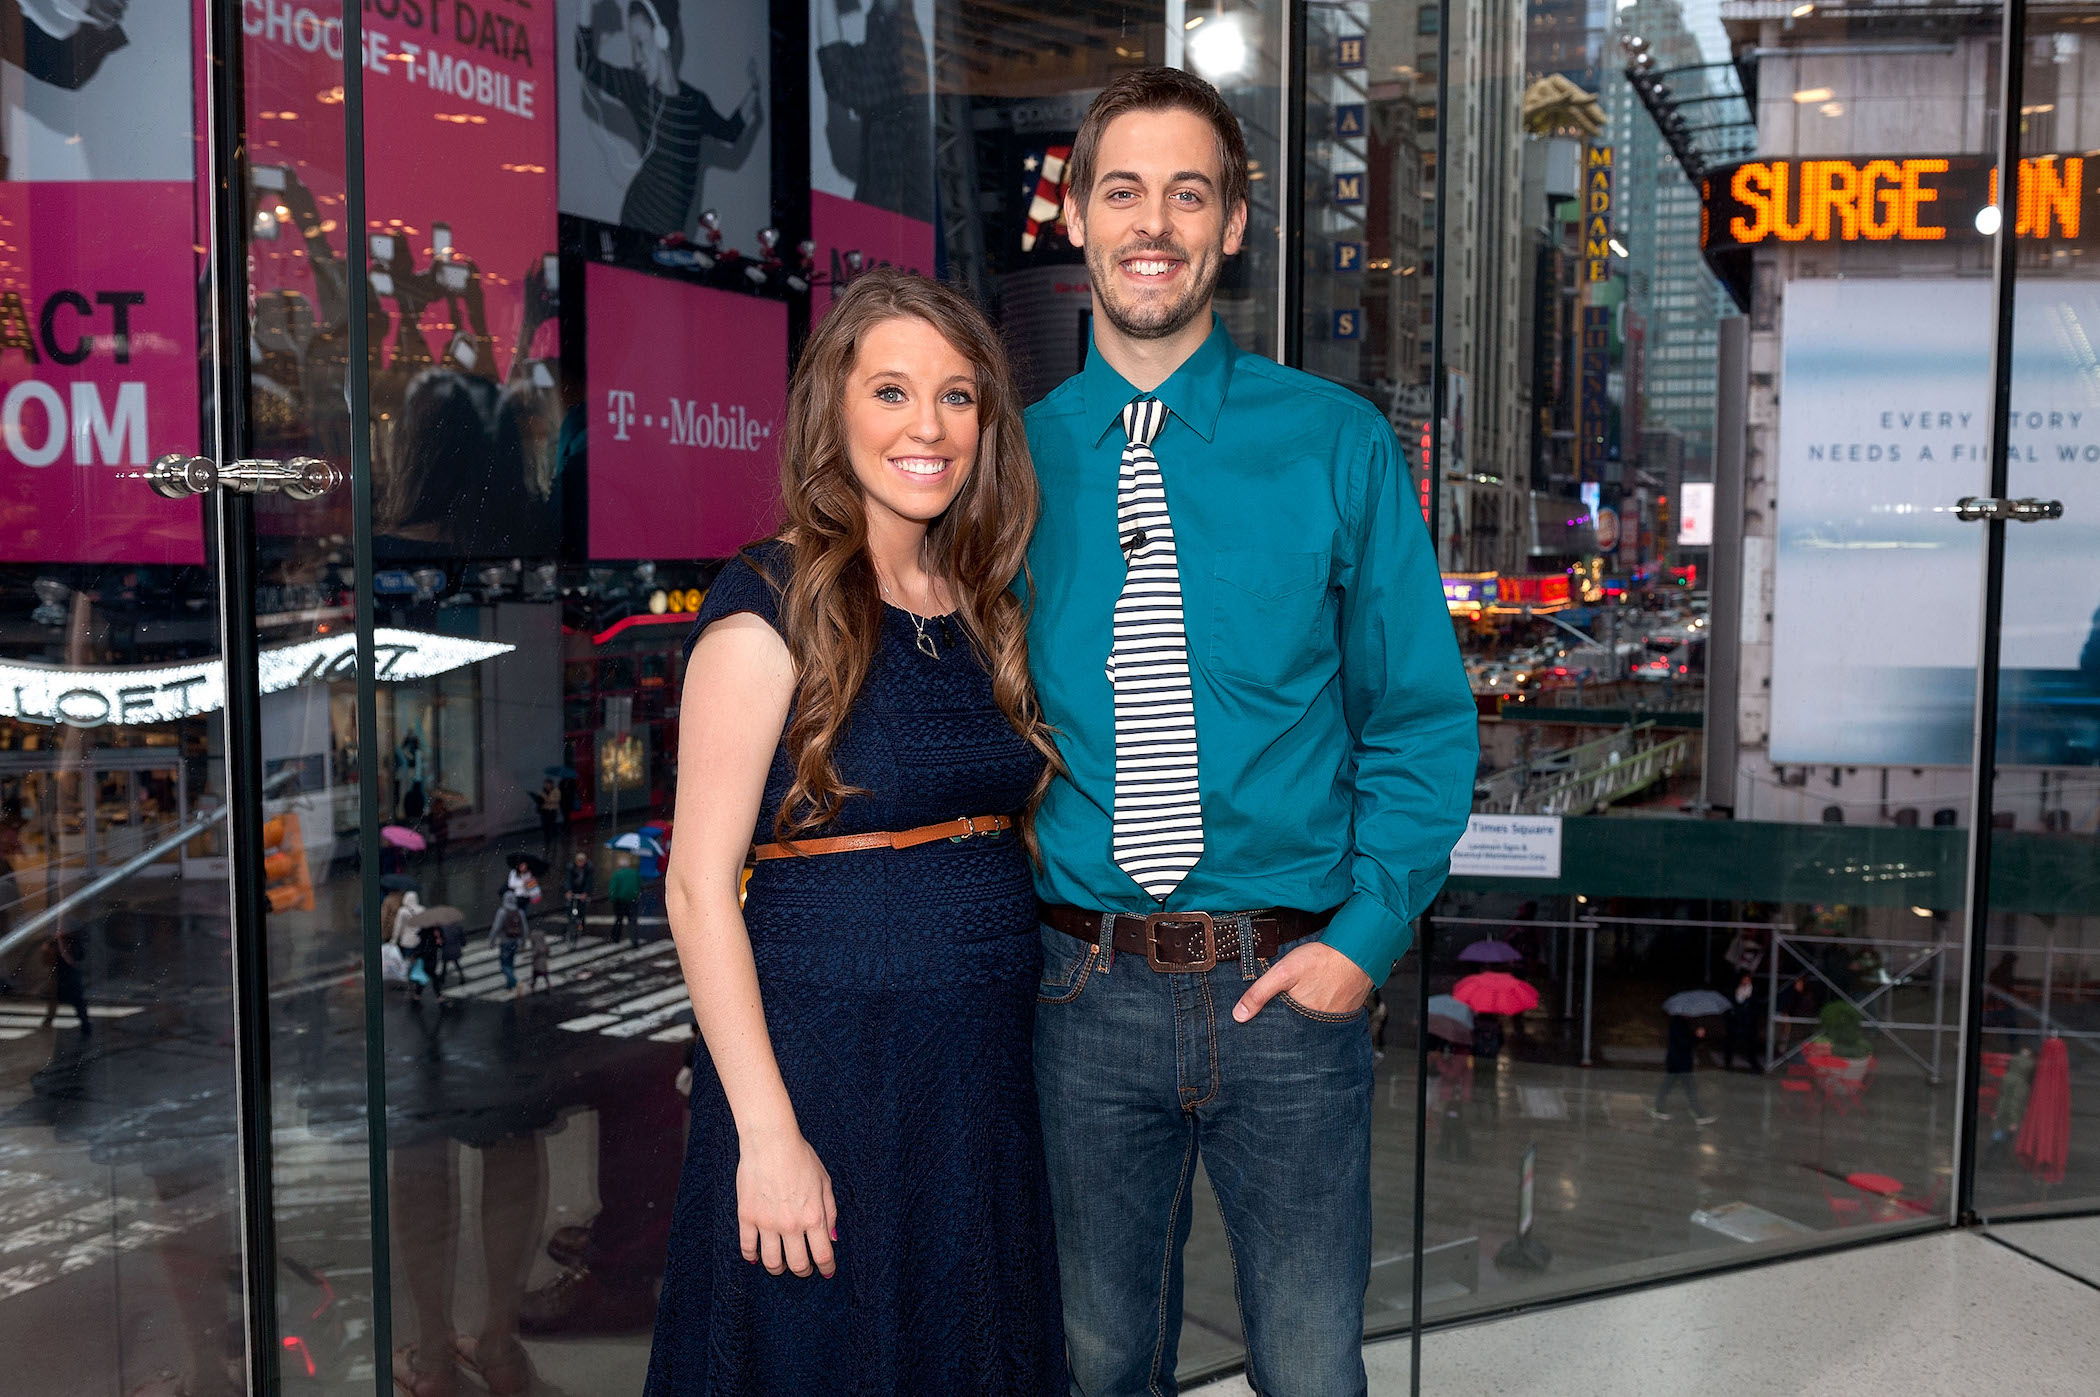 Jill Duggar of the Duggar family and Derick Dillard stand together and smile on the set of 'Extra'